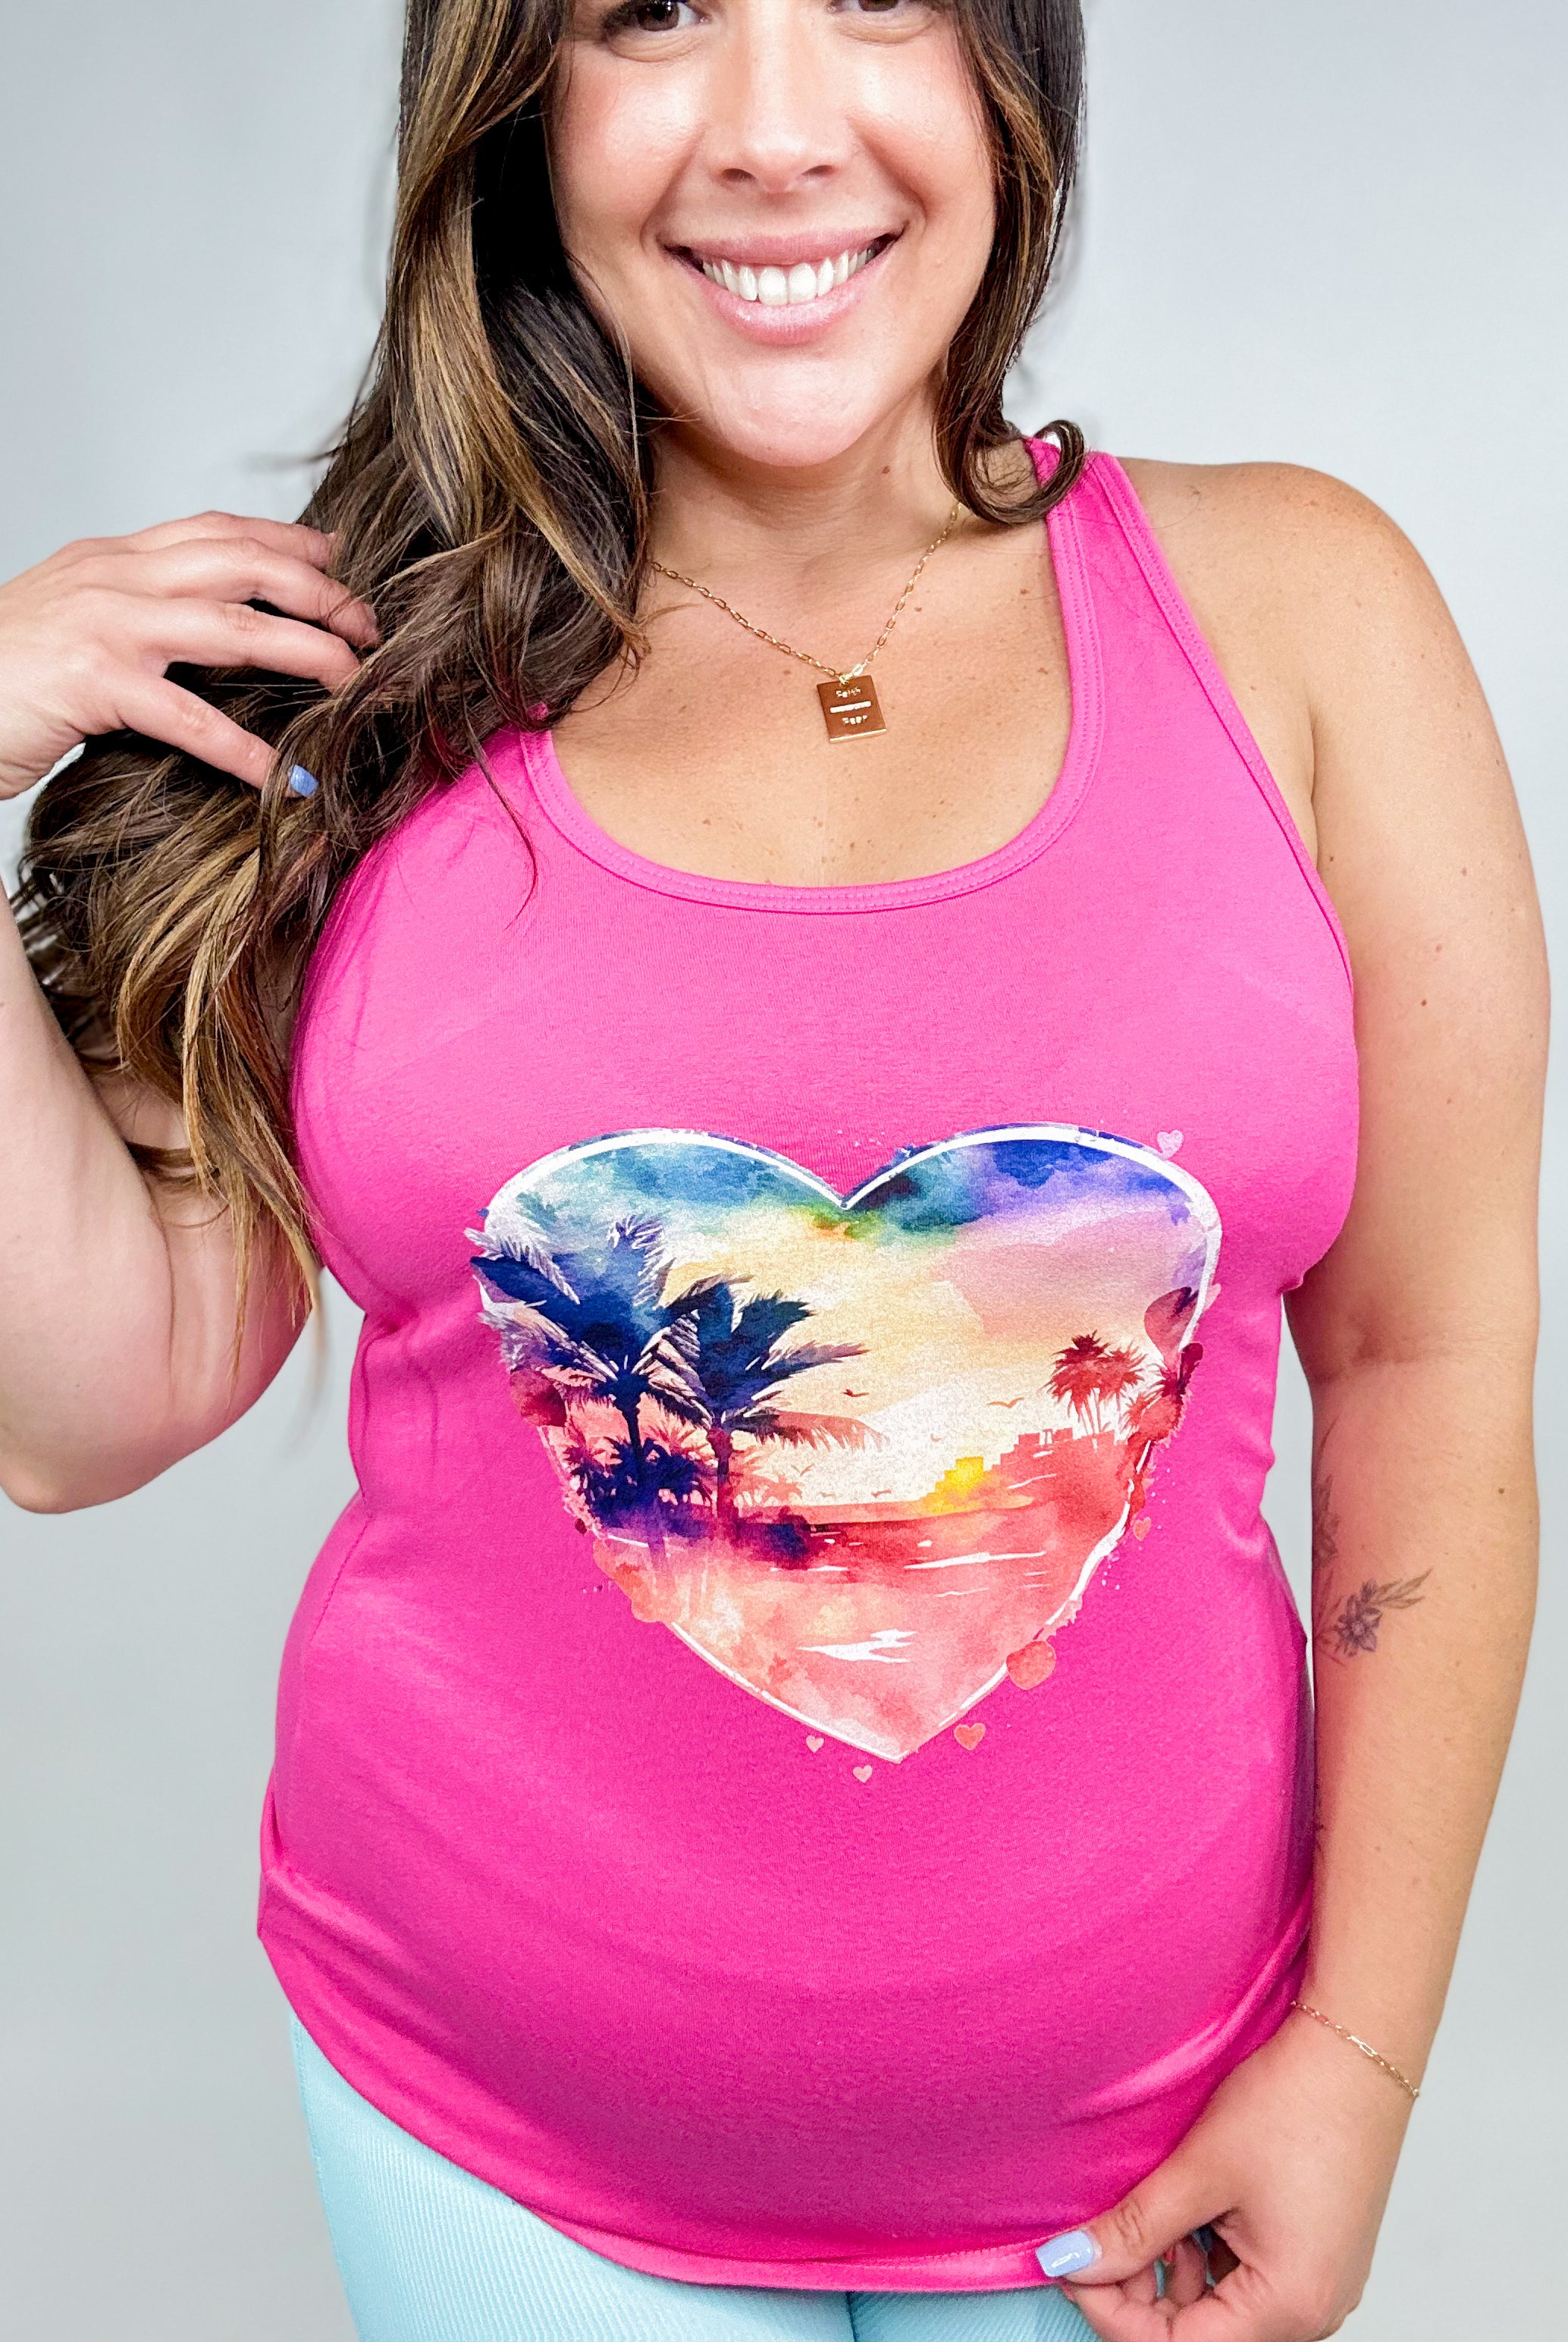 Horizon Heart Sunset Graphic Tank-130 Graphic Tees-Heathered Boho-Heathered Boho Boutique, Women's Fashion and Accessories in Palmetto, FL